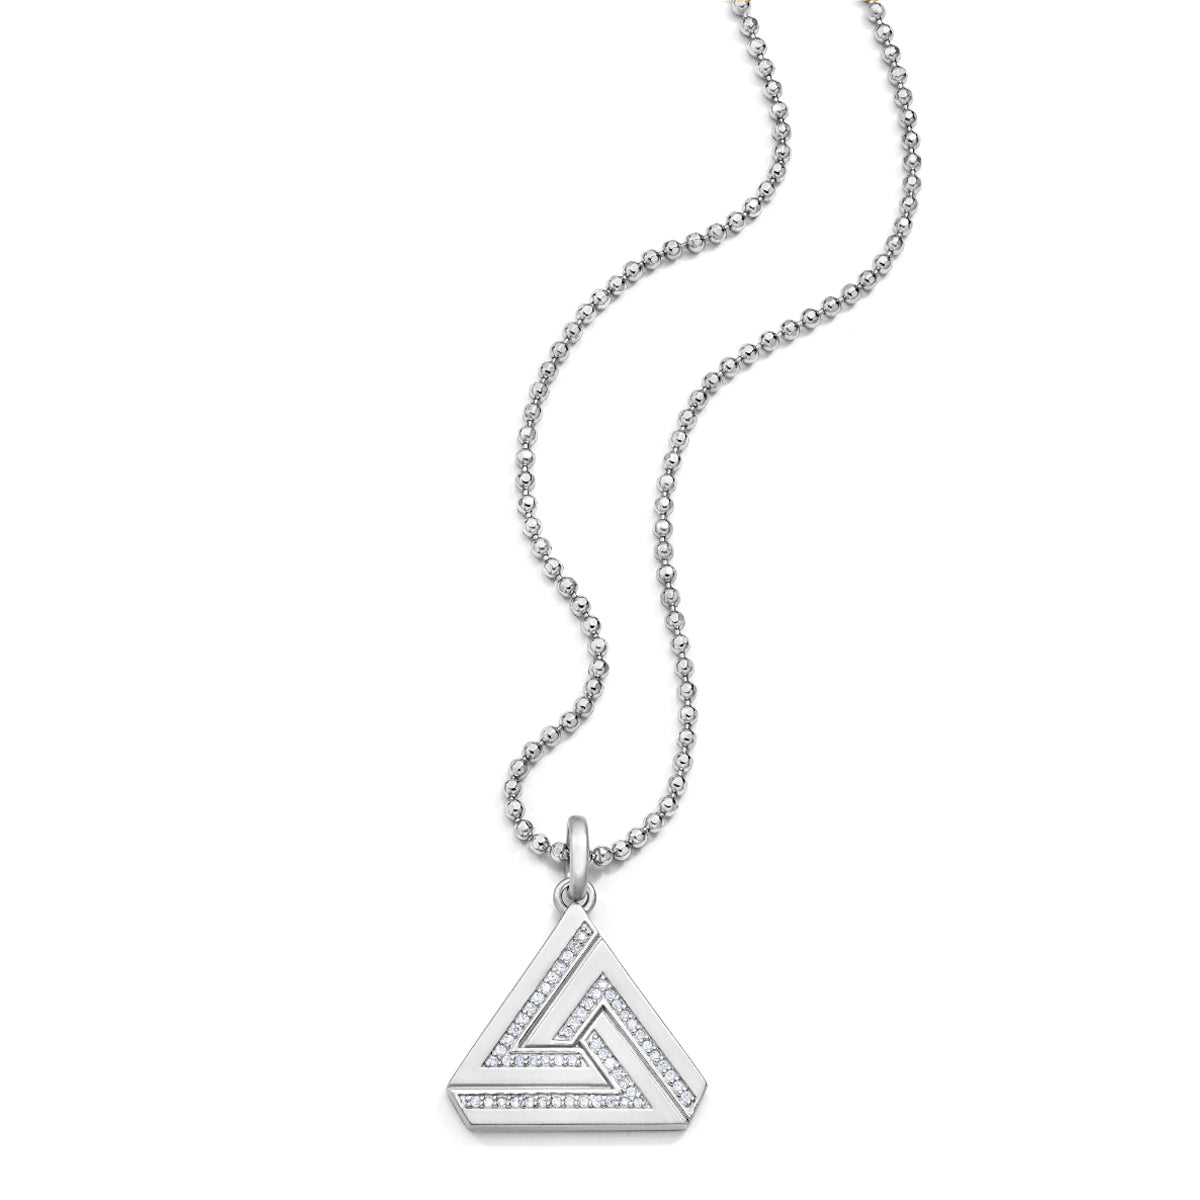 Small Silver Abracadabra Triangle Series 1 - July 28th Expected Arrival